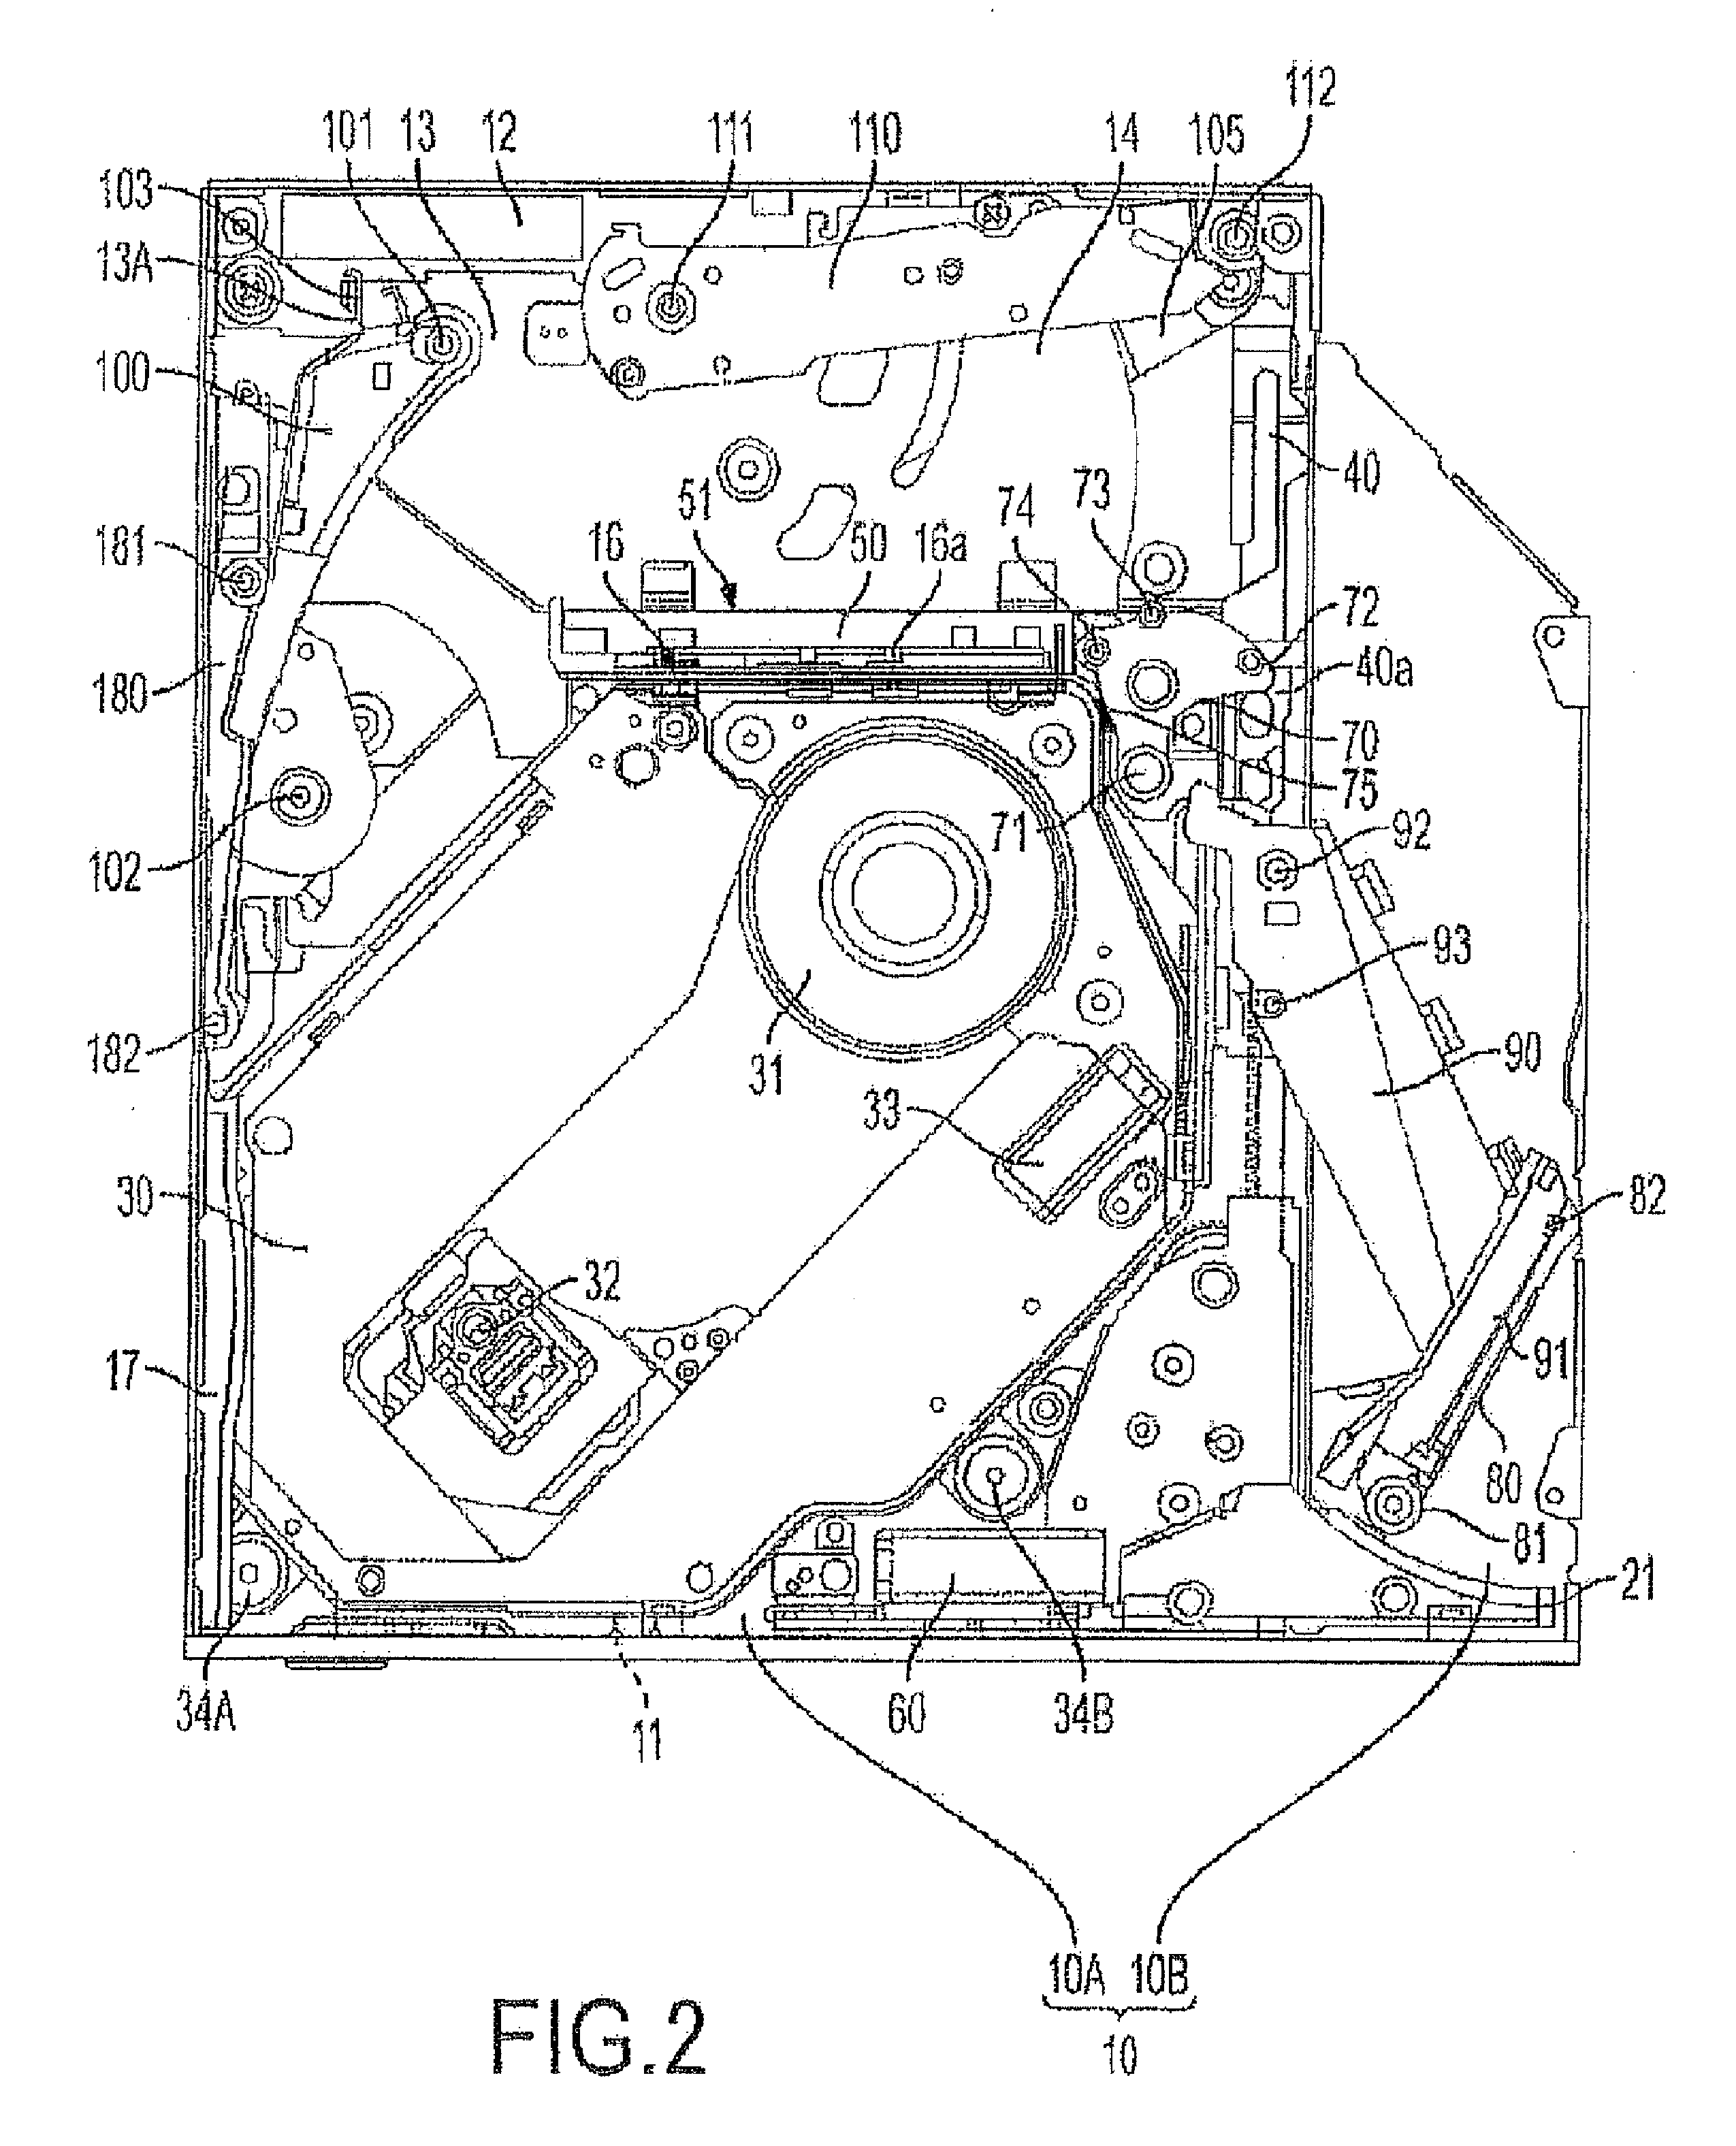 Disk apparatus with resilient member on cam mechanism connecting a main slider to a sub-slider